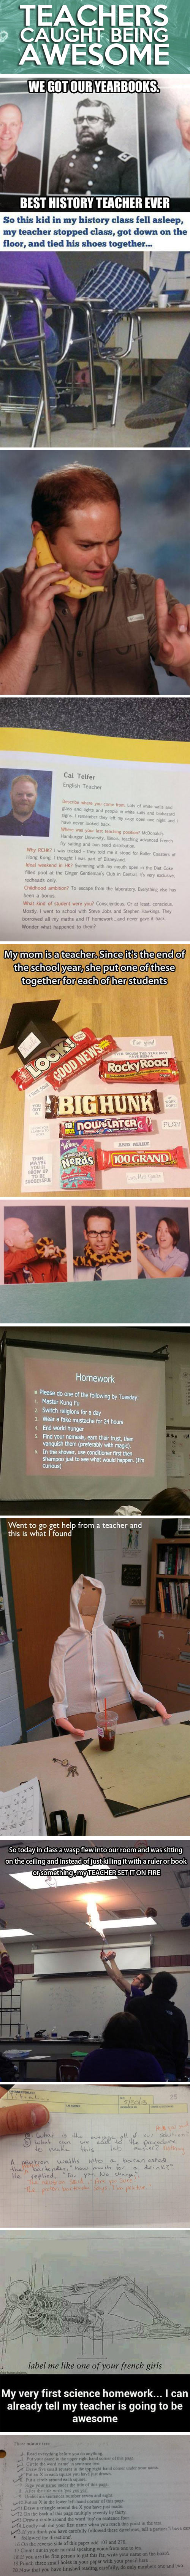 Teachers being awesome.